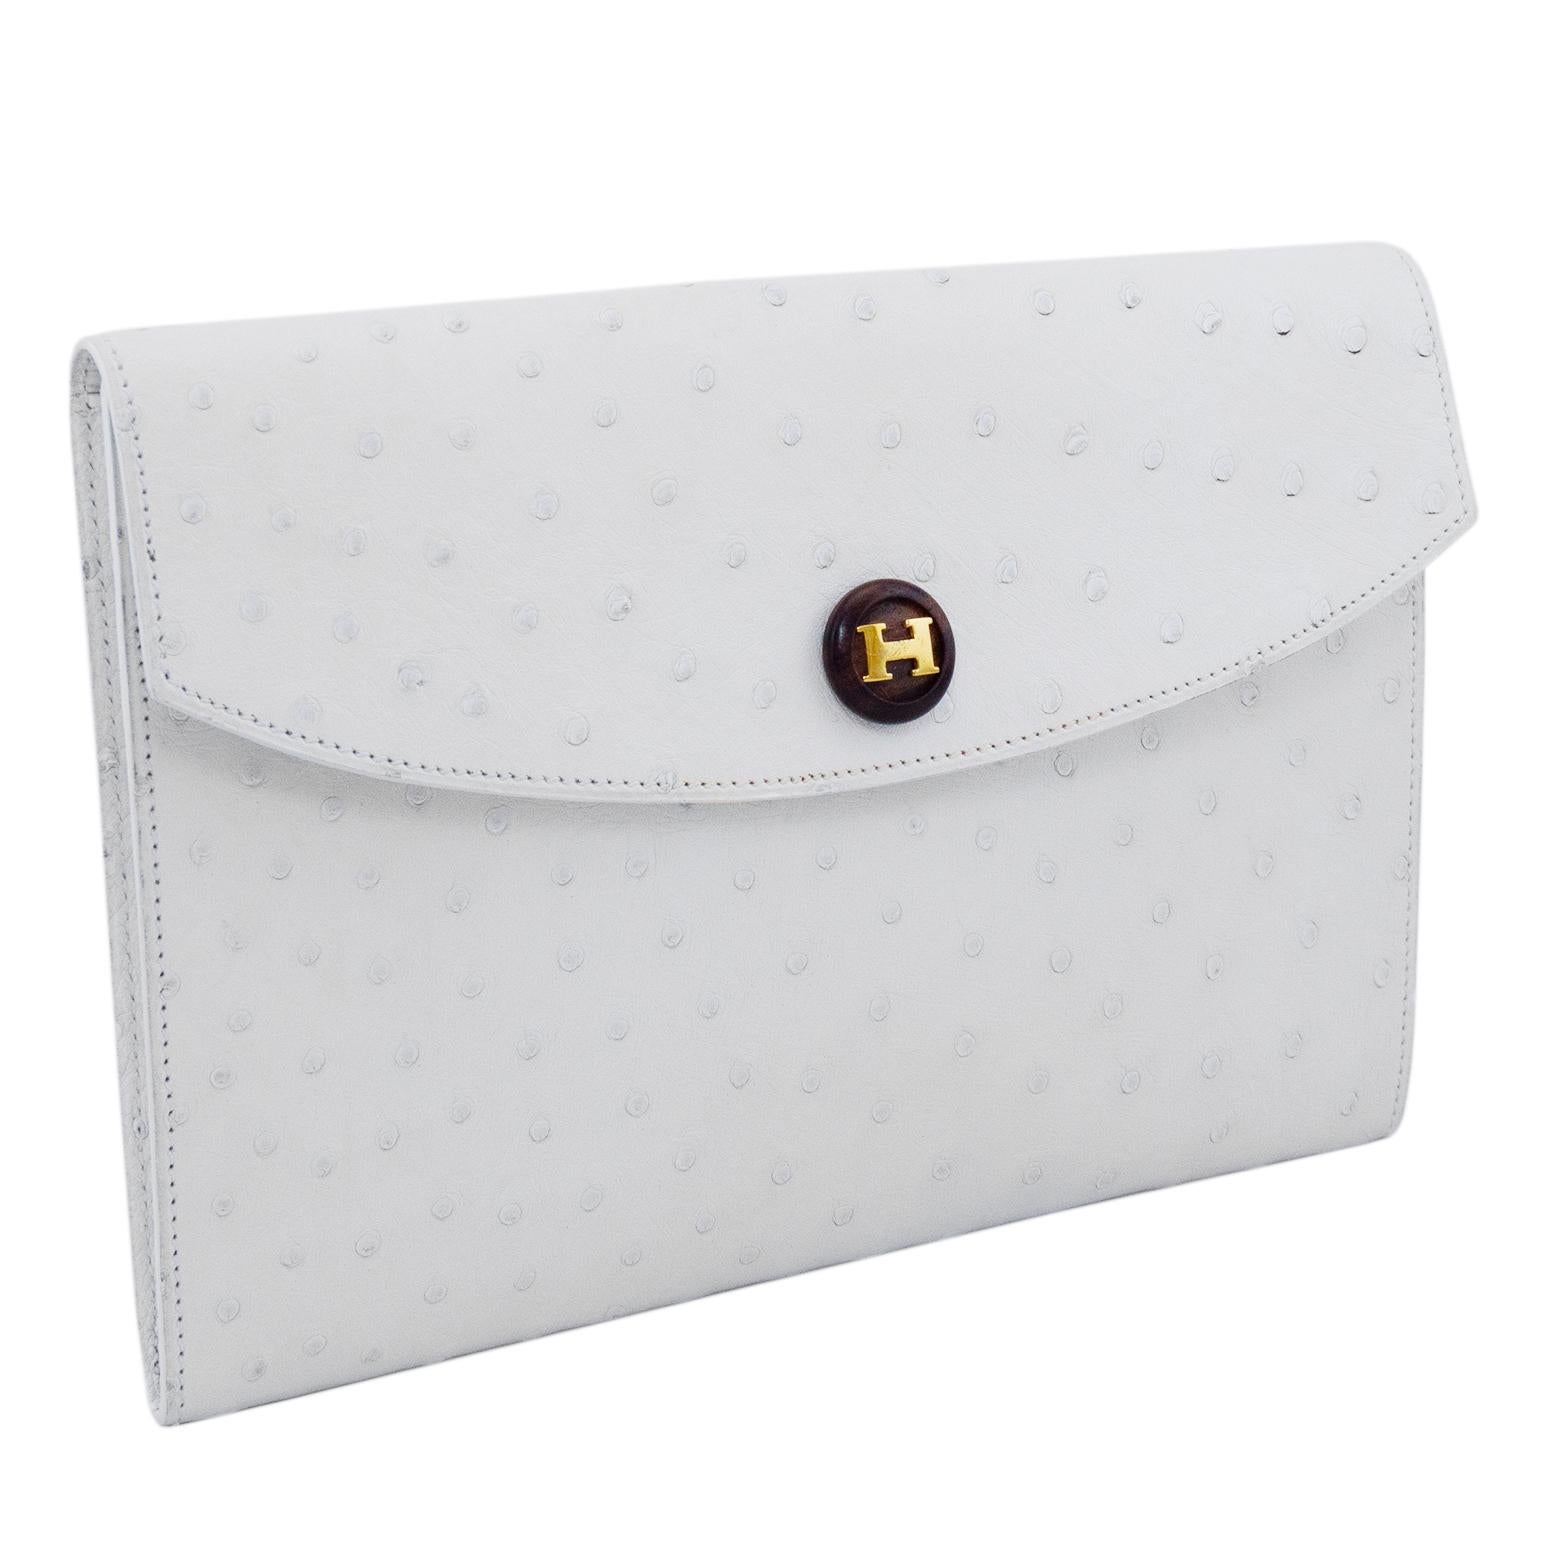 Classic and elegant white ostrich effect Hermes Rio clutch. Envelope style with a single wood round button snap button closure embellished with a gold tone metal H logo. Single unlined large interior compartment. Excellent vintage condition, the